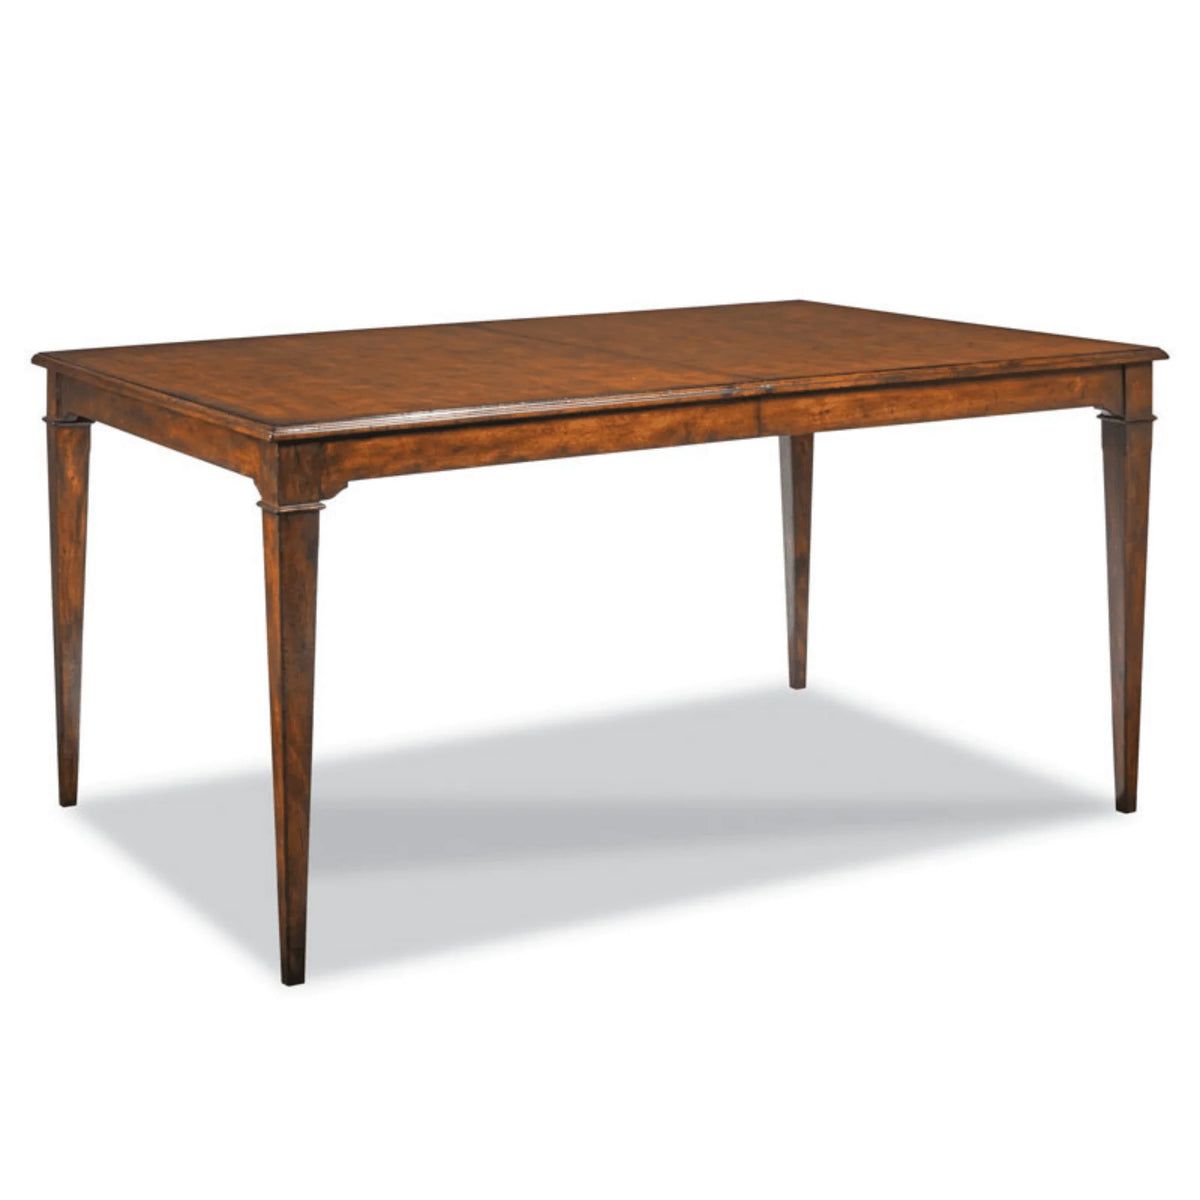 Marseille Rectangular Dining Table | The Well Appointed House, LLC